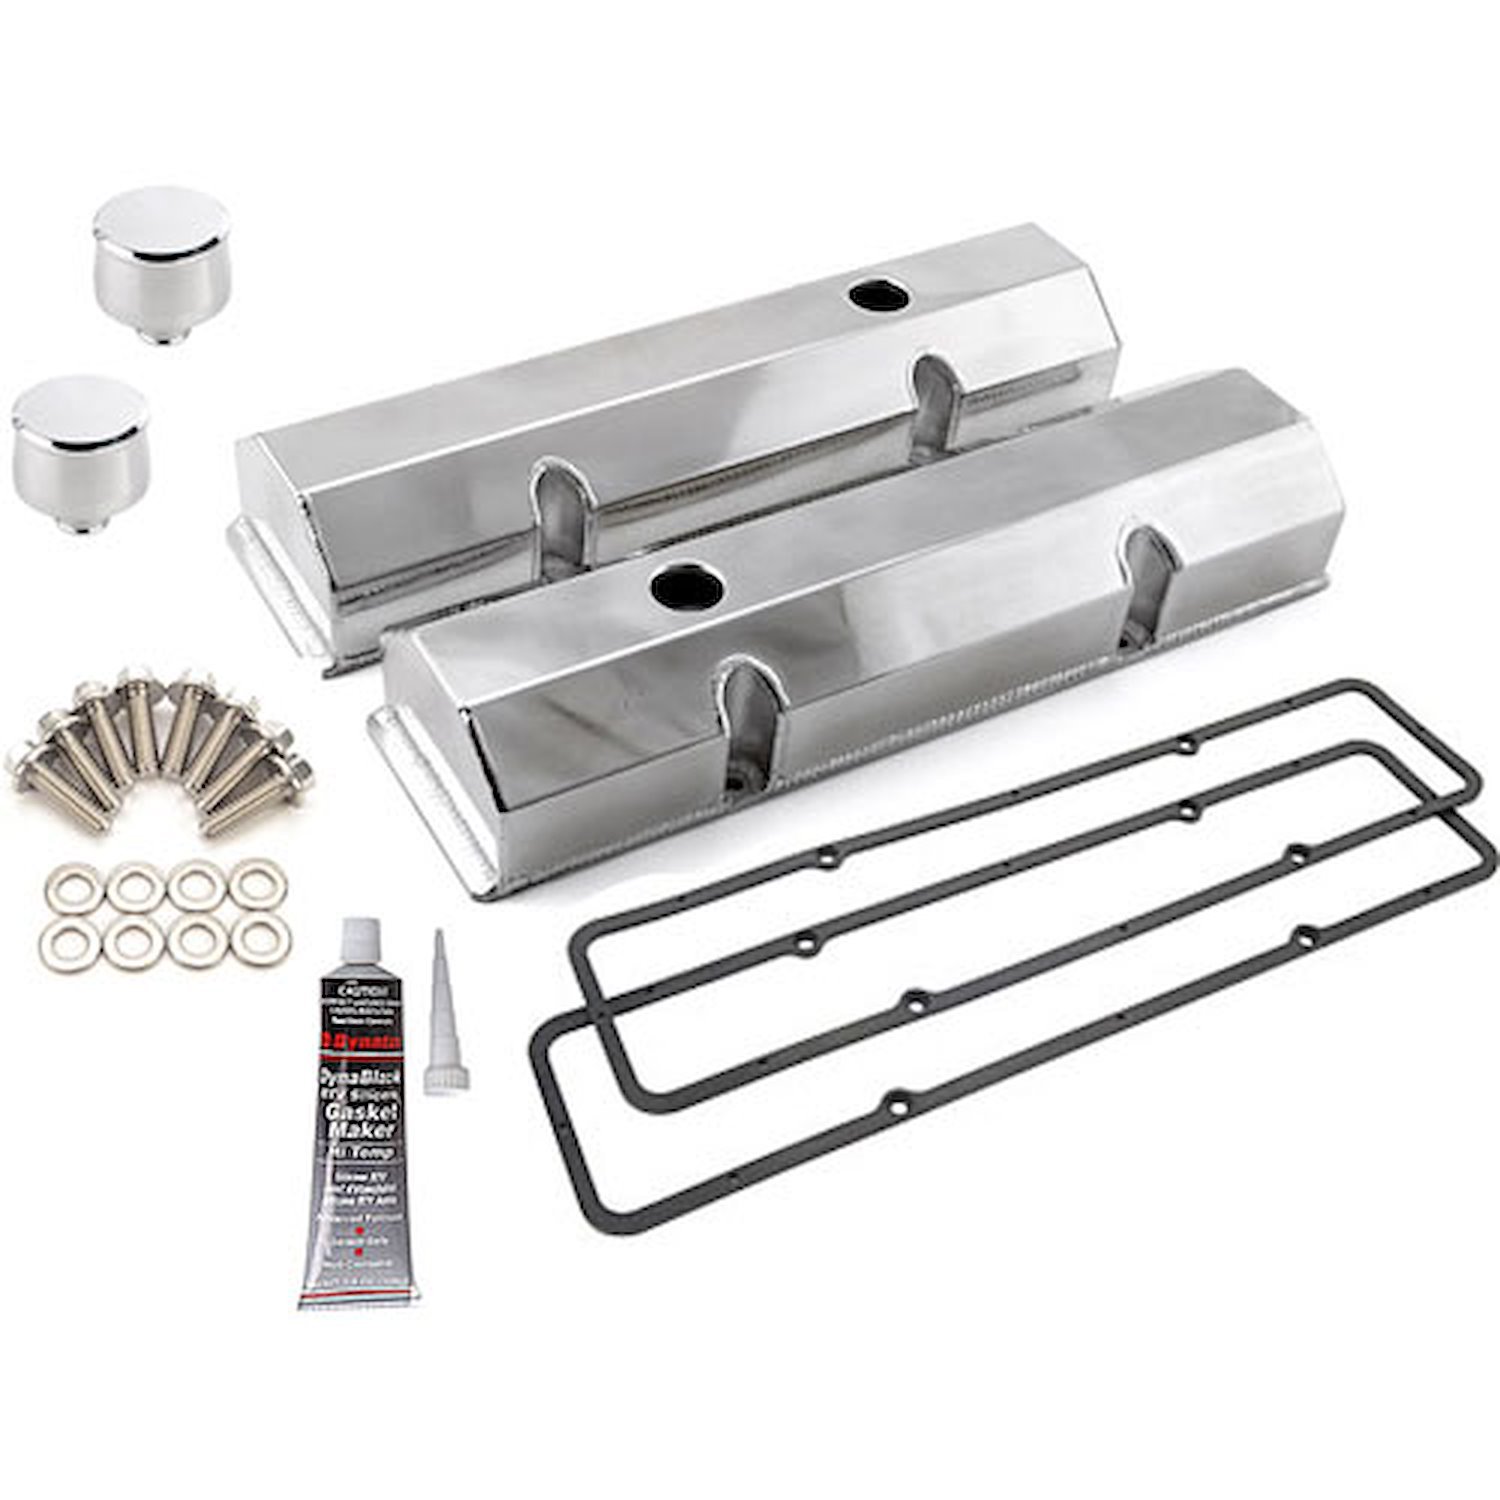 Fabricated Aluminum Valve Cover Kit Small Block Chevy 350 Includes: